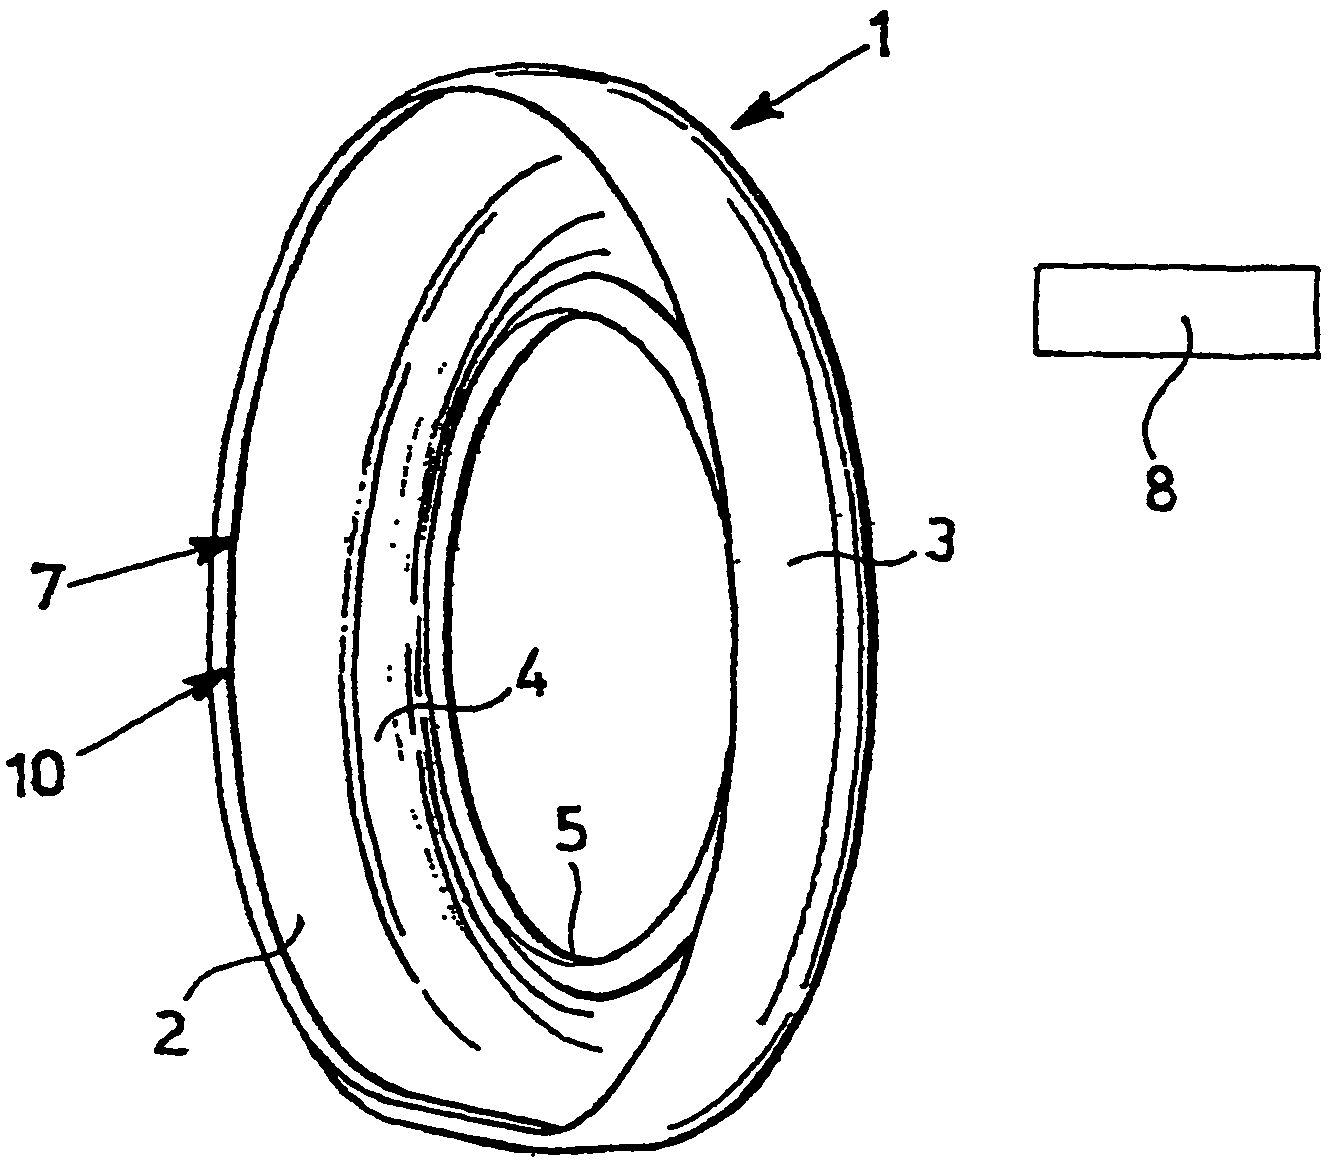 Methods for detecting, monitoring, and/or controlling behaviour of a tire in motion